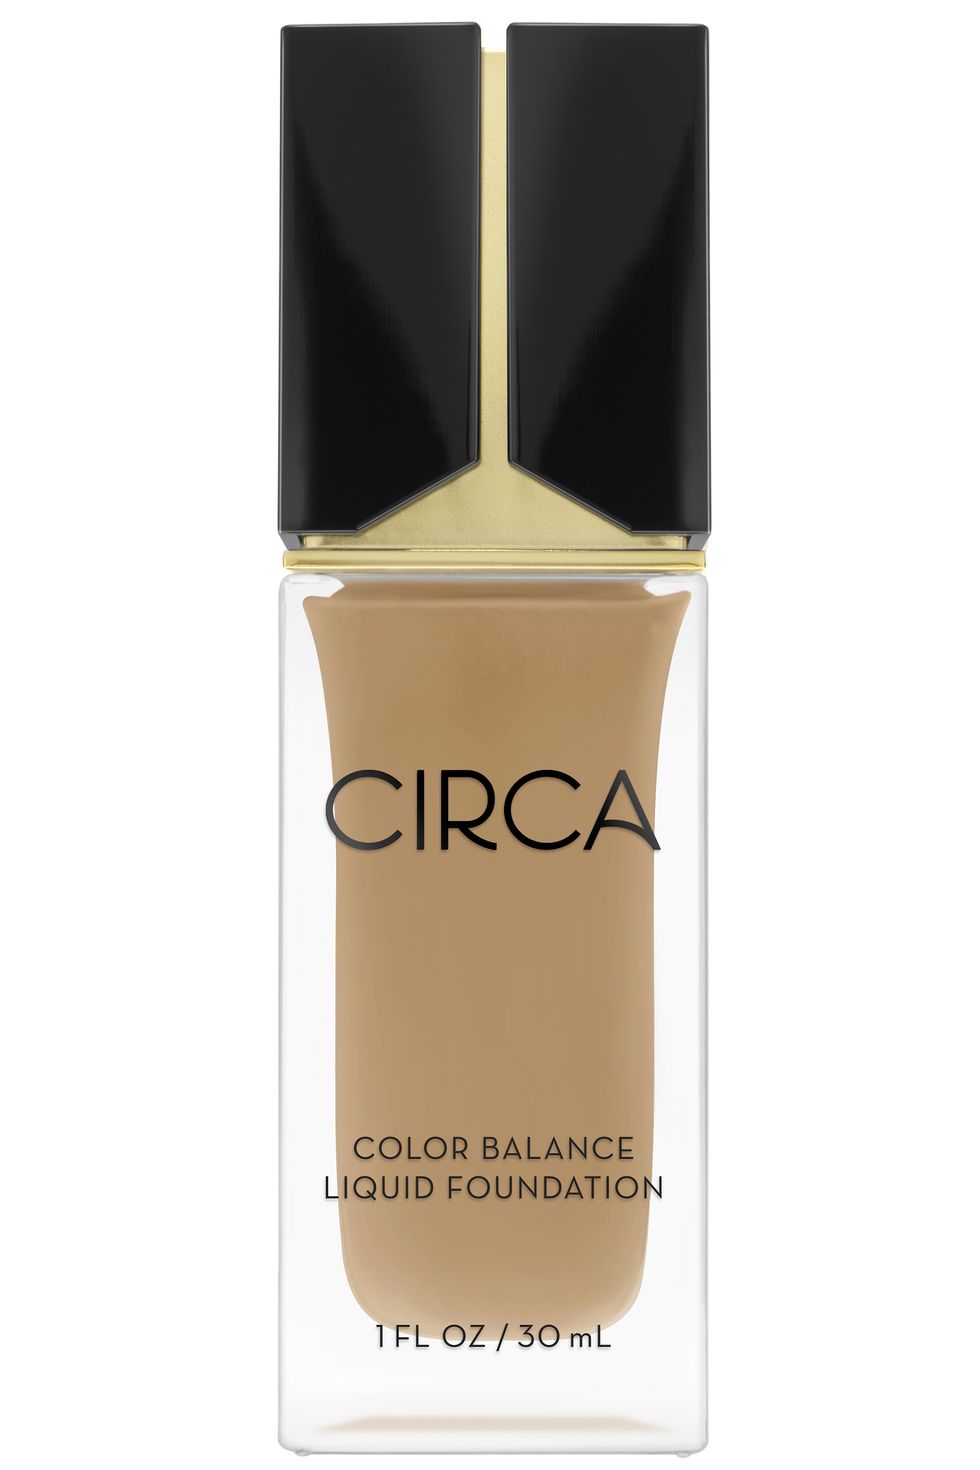 <p>You can skip color-correcting primers and let this foundation do the work of hiding red, purple or yellow tones in the skin.</p><p><strong>Circa</strong> Color Balance Liquid Foundation, $15, <a href="http://www.circabeauty.com/face/products/18/color-balance-liquid-foundation" target="_blank">circabeauty.com</a>.</p>